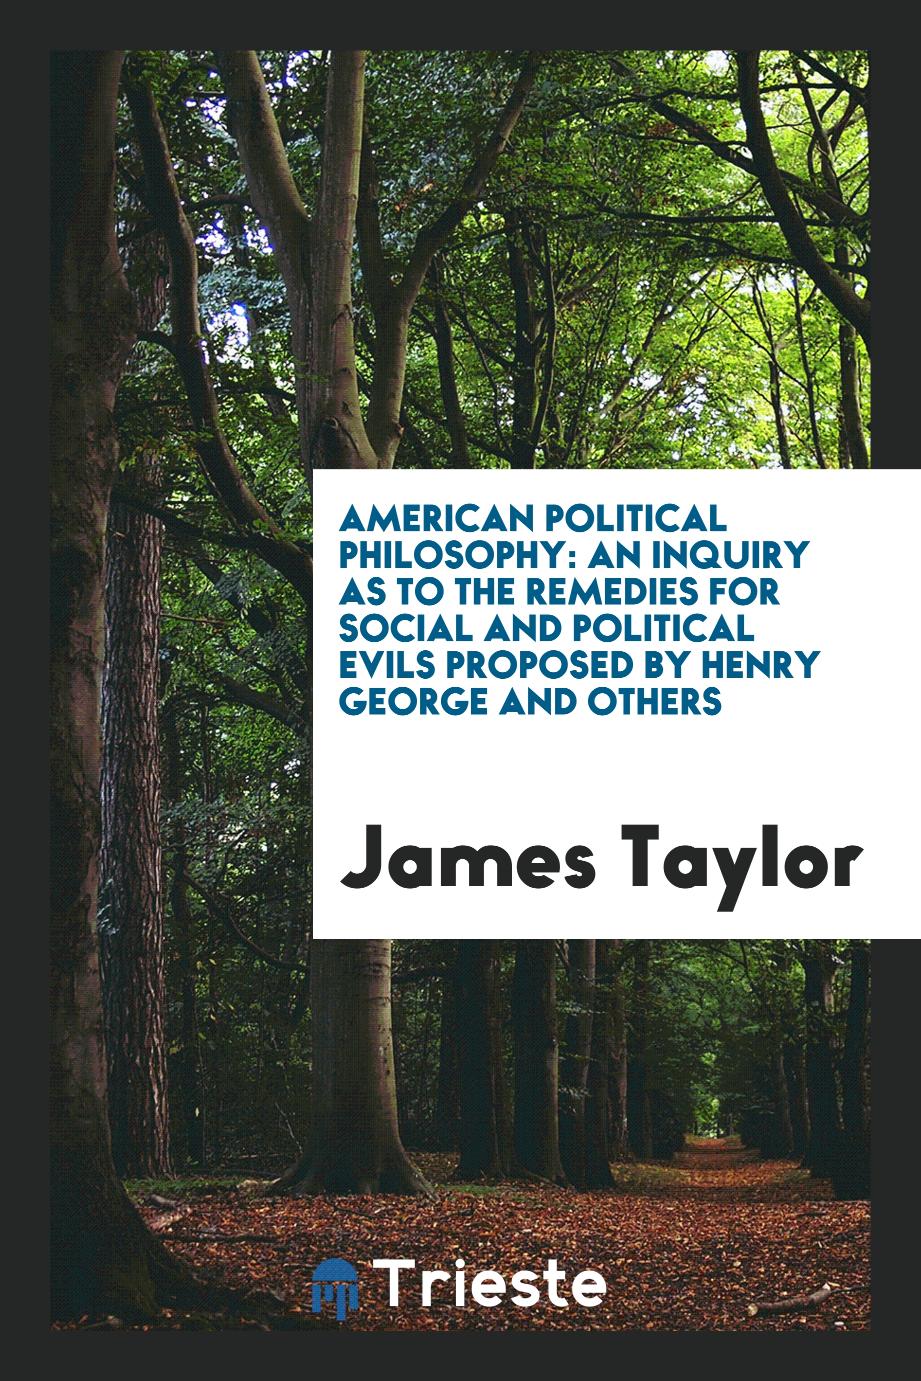 American Political Philosophy: An Inquiry as to the Remedies for Social and Political Evils Proposed by Henry George and Others